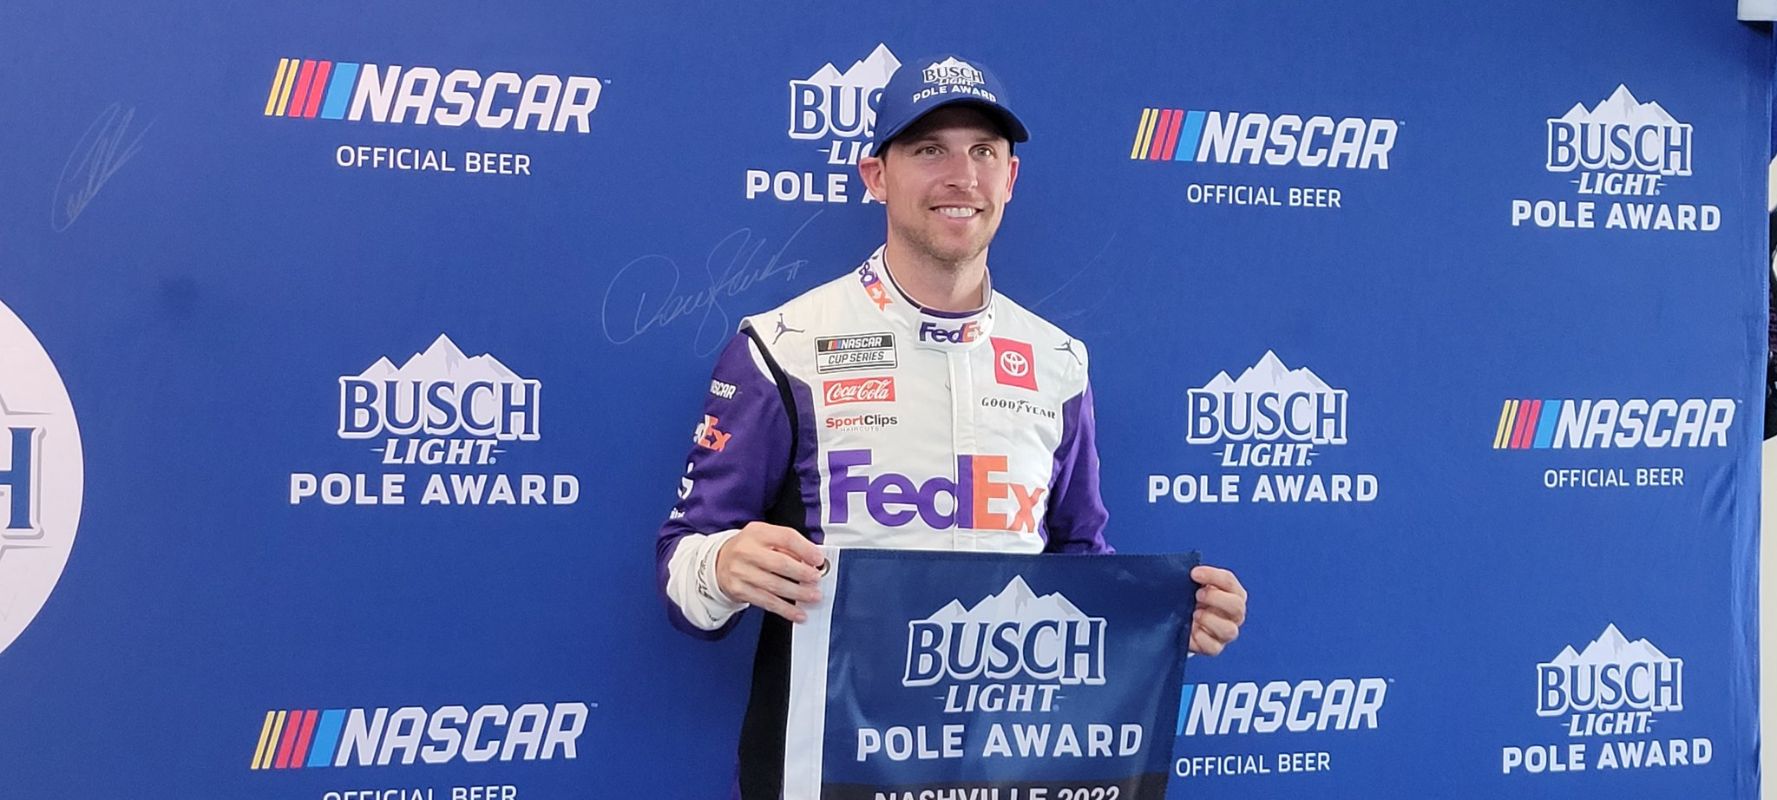 Qualifying for yesterday's race was rain-shortened as a summer storm came in and doused the racetrack before the final round of qualifying began. However, Denny Hamlin held it together to get the pole for the race, followed by Joey Logano, Kyle Larson, Chase Elliot, and Daniel Suarez.